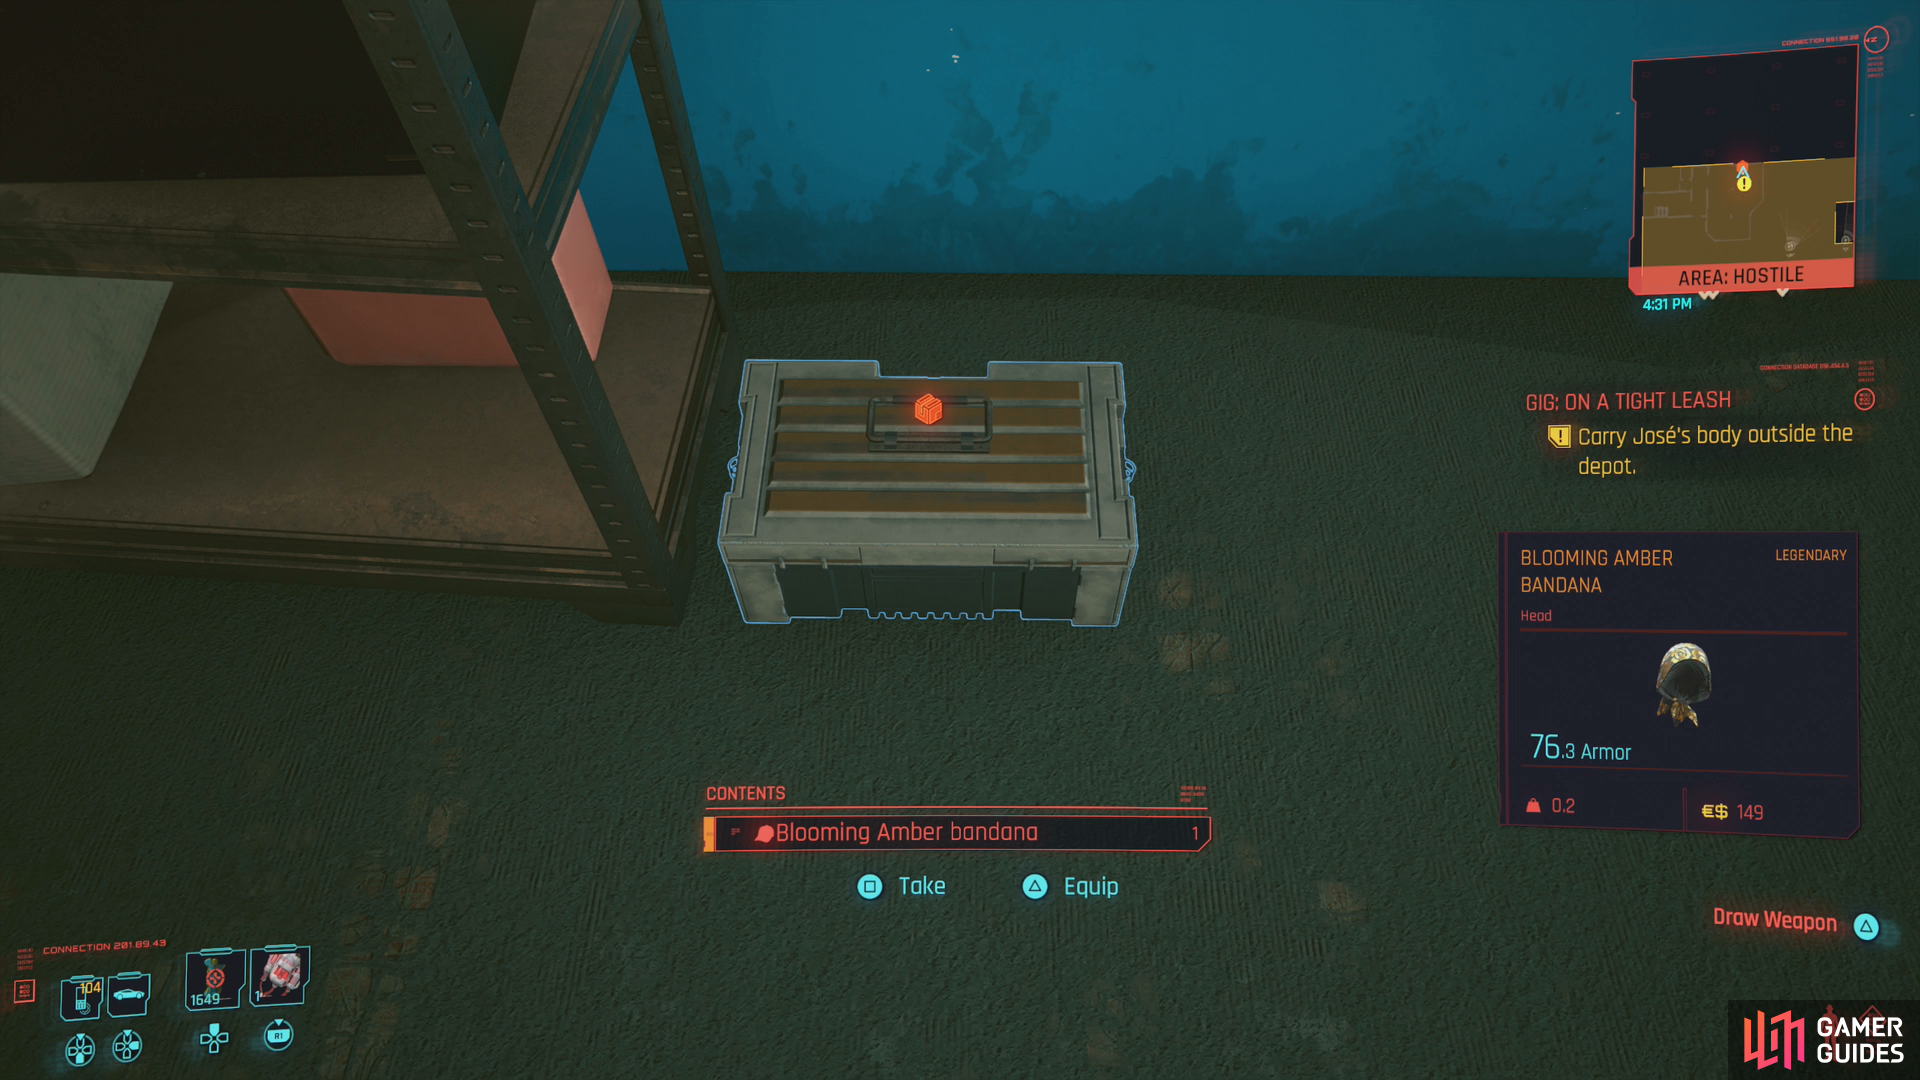 then loot a nearby container for a legendary drop.